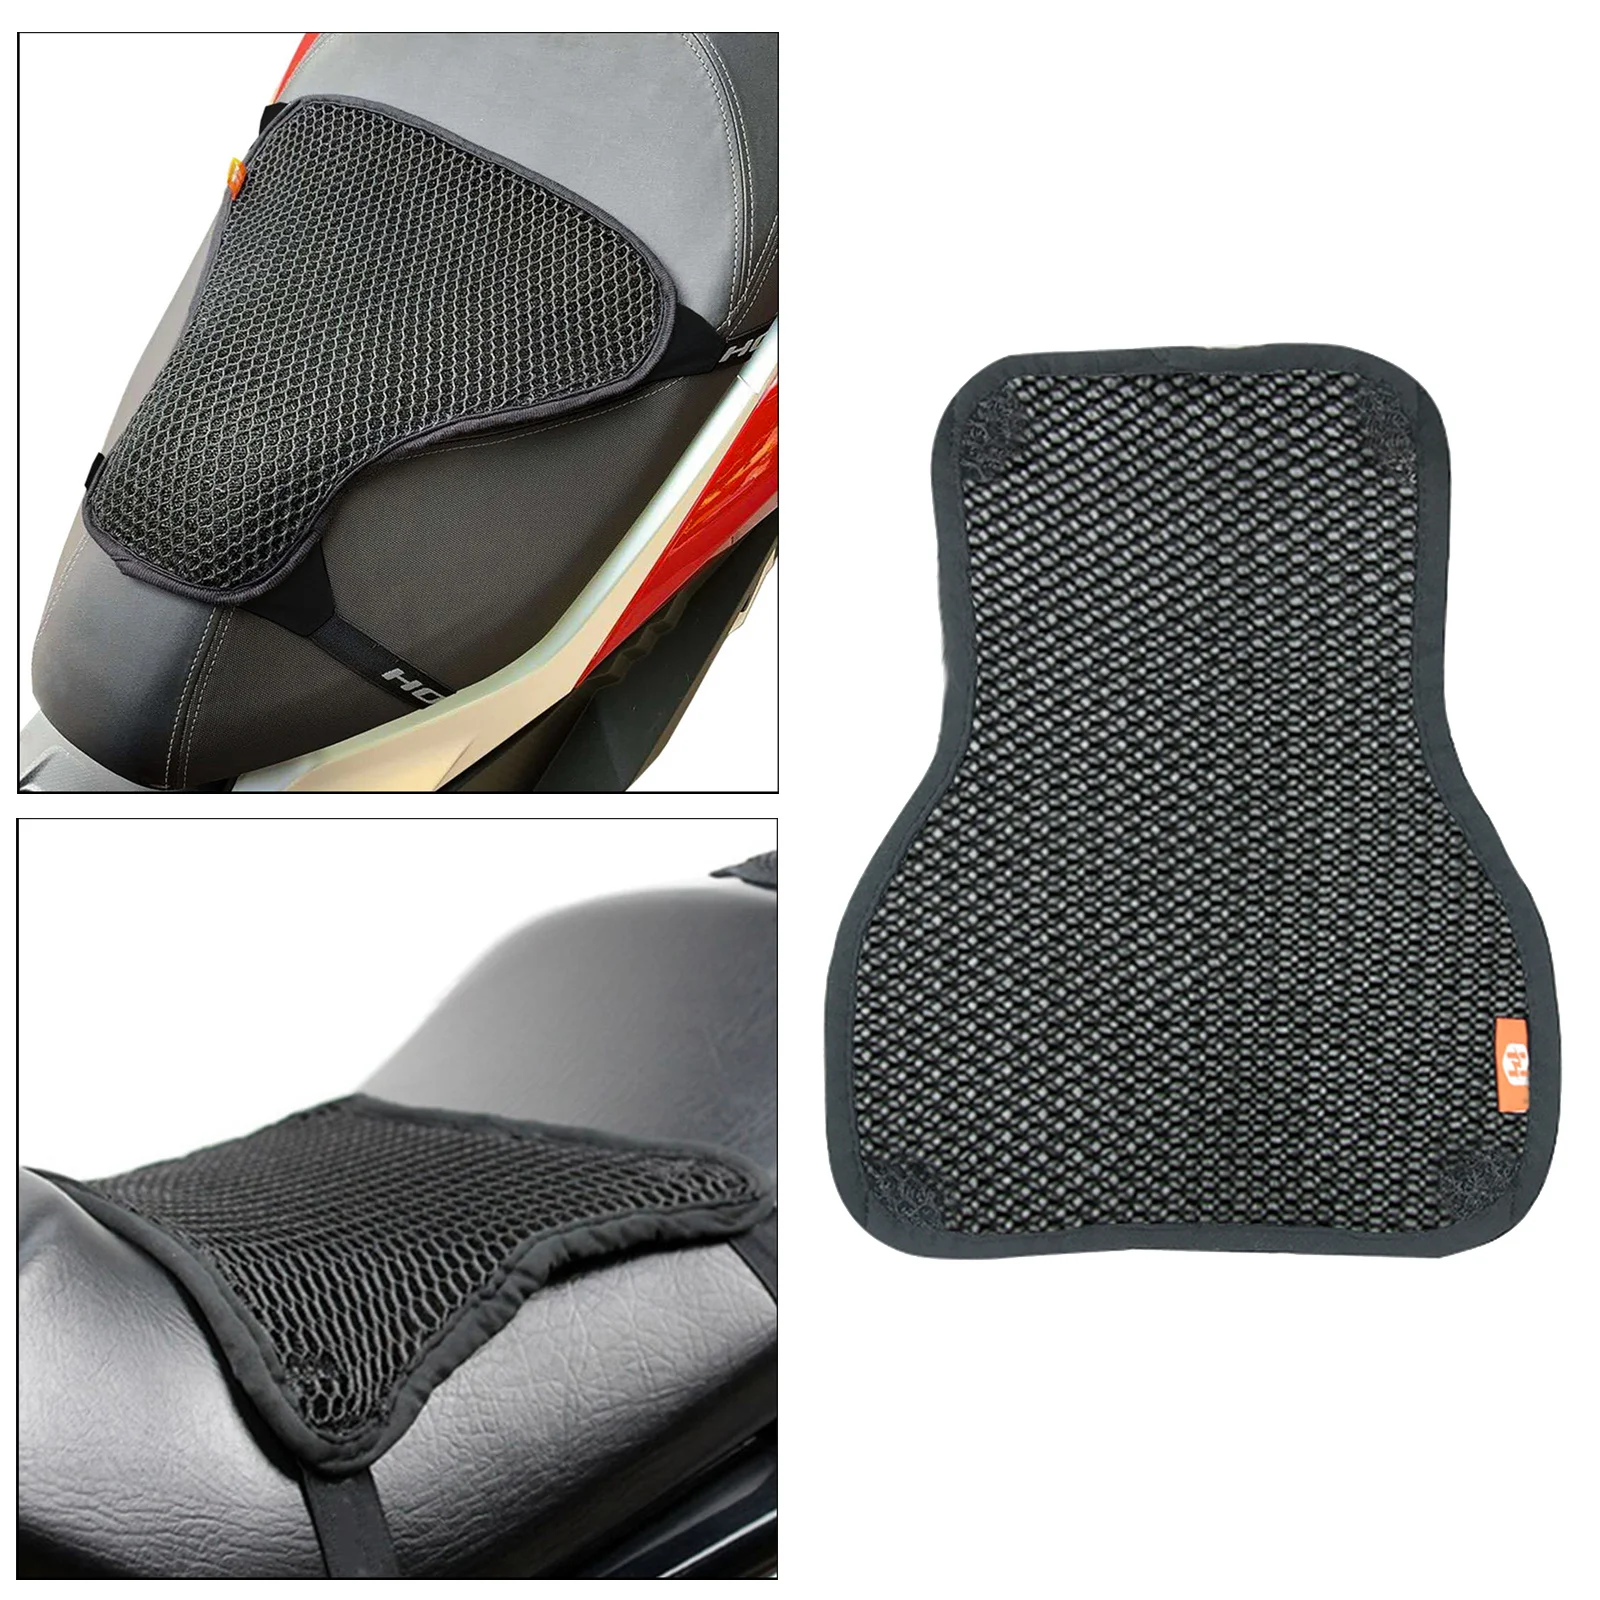 Motorcycle Seat Cushion Butt Protector Cover Reduces Pressure and Fatigue Makes Long Rides More Comfortable